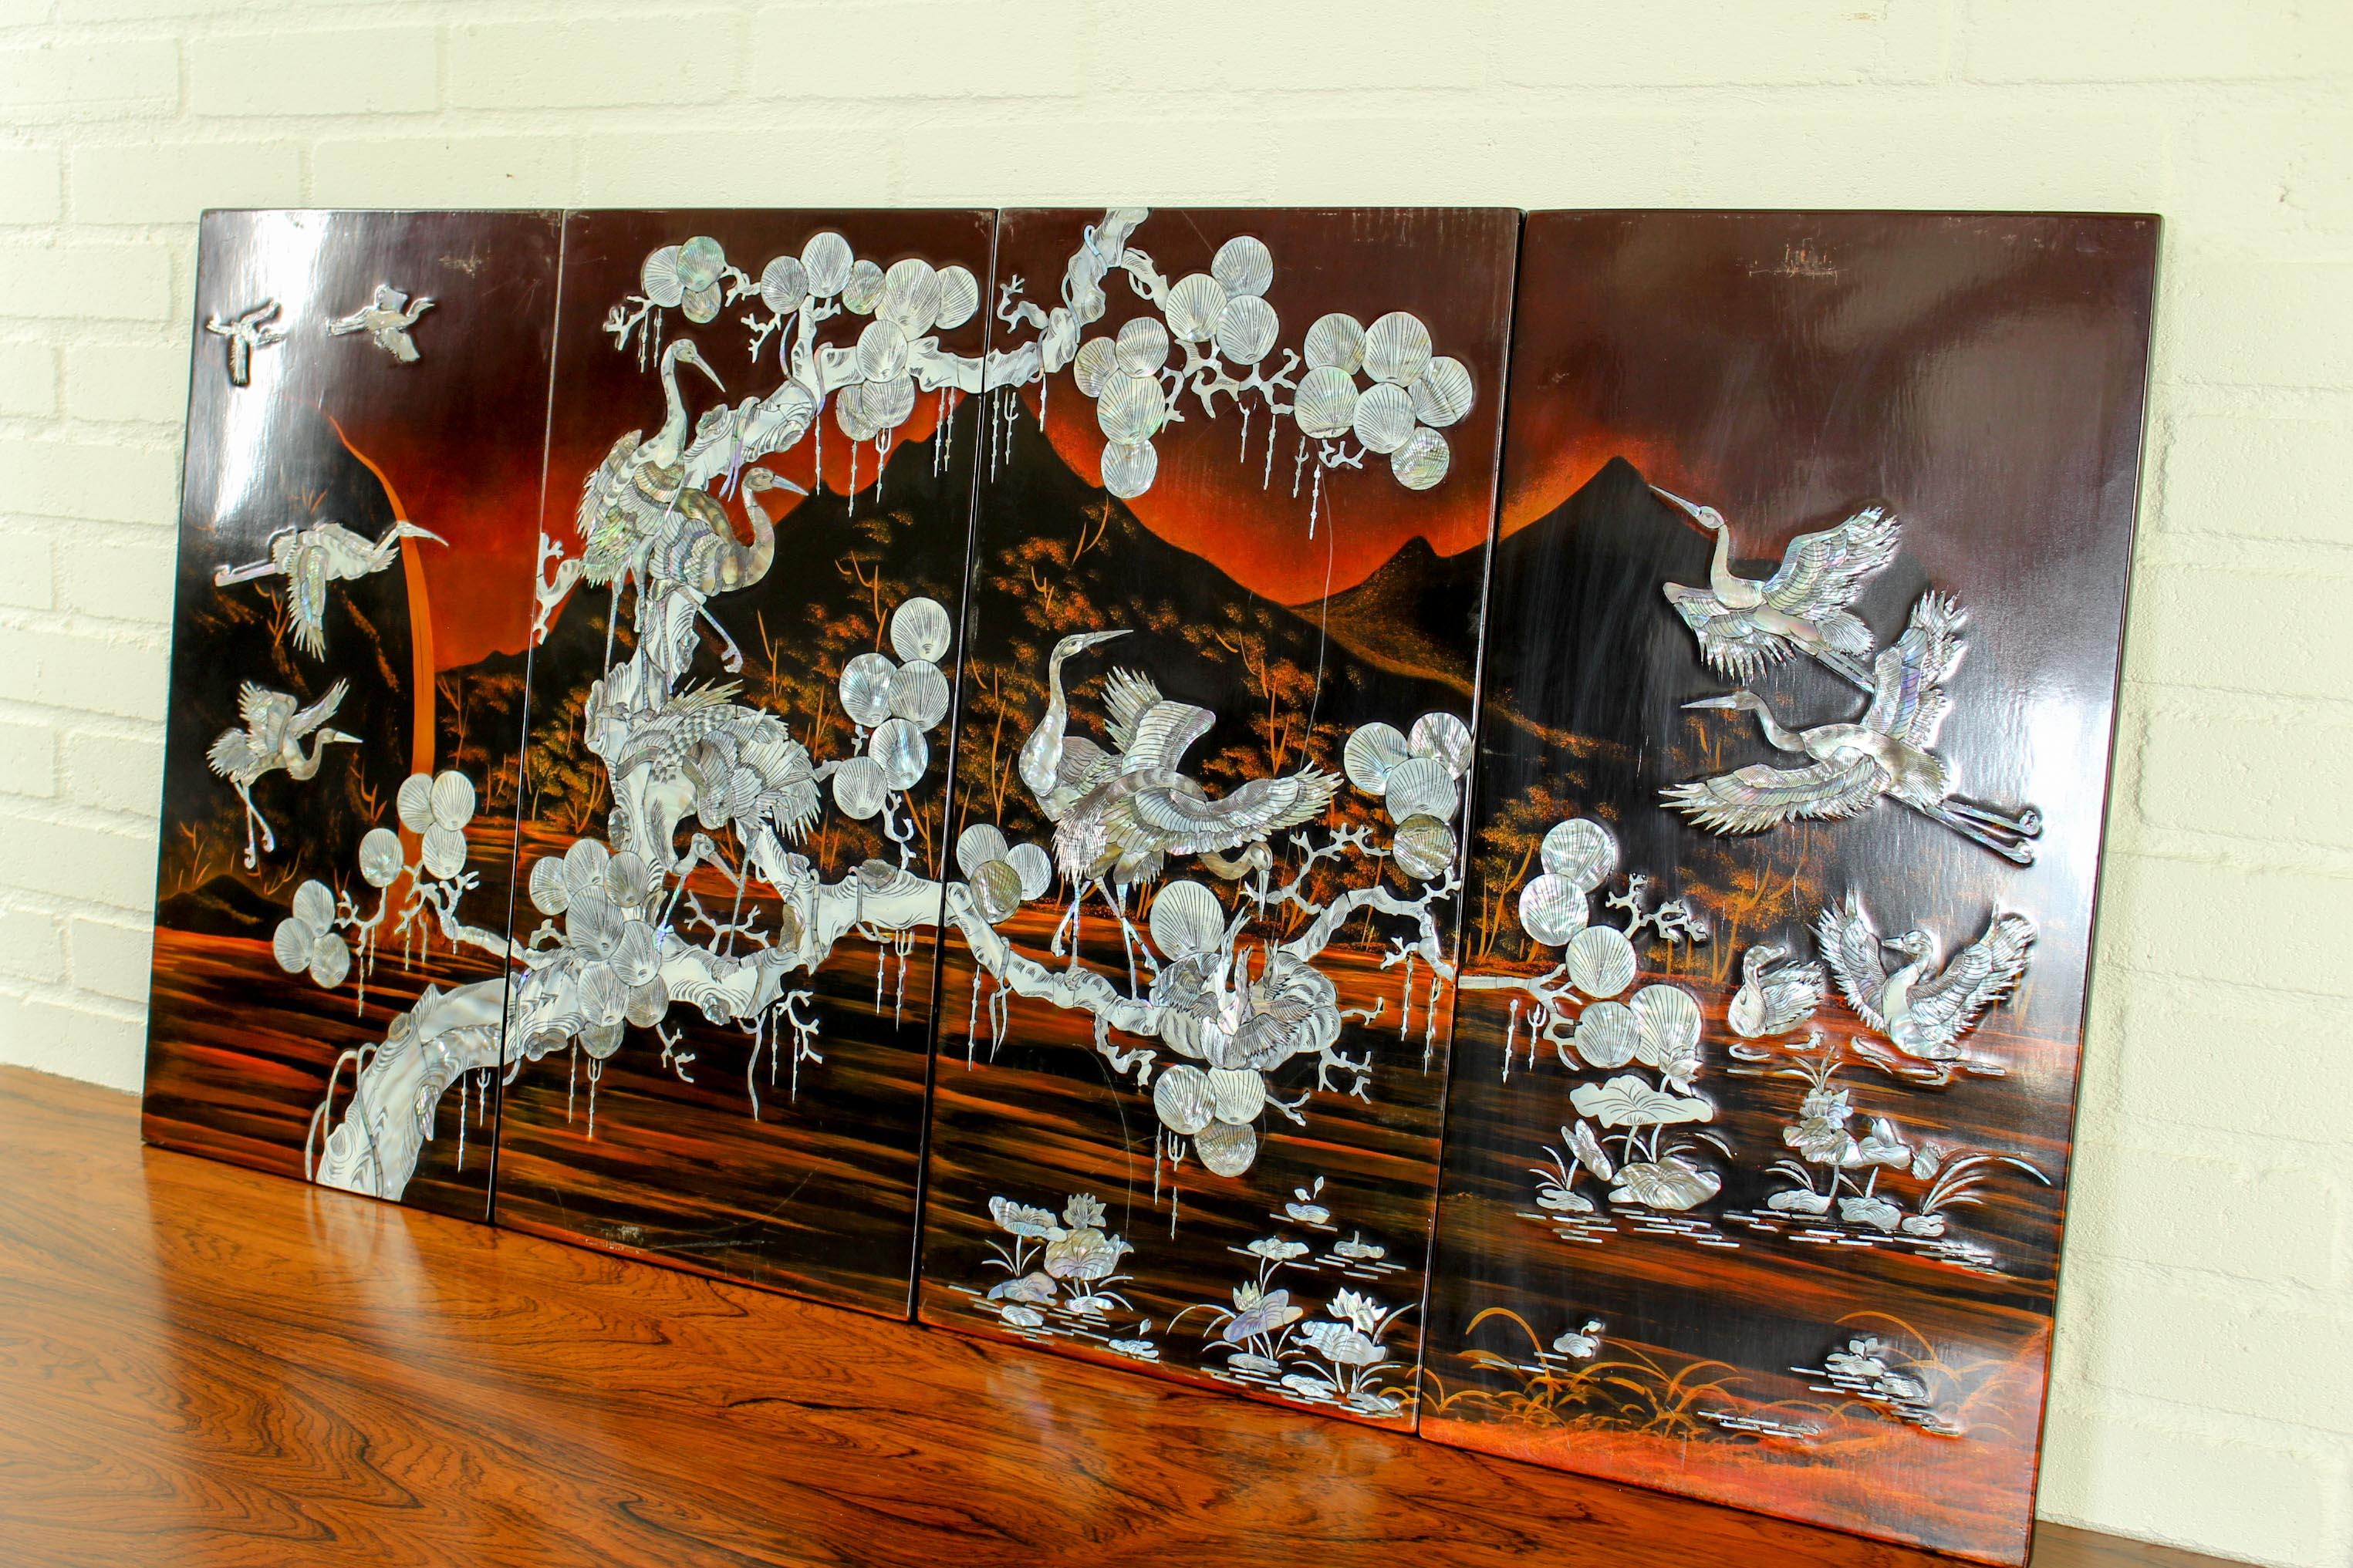 Are you looking for some magnificent, vintage Oriental / Japanese wall art to display in your home or business ? Look no further than this spectacular, retro set of 4 wall panels of MOP (mother of pearl) shell birds on lacquered wood wall panels.